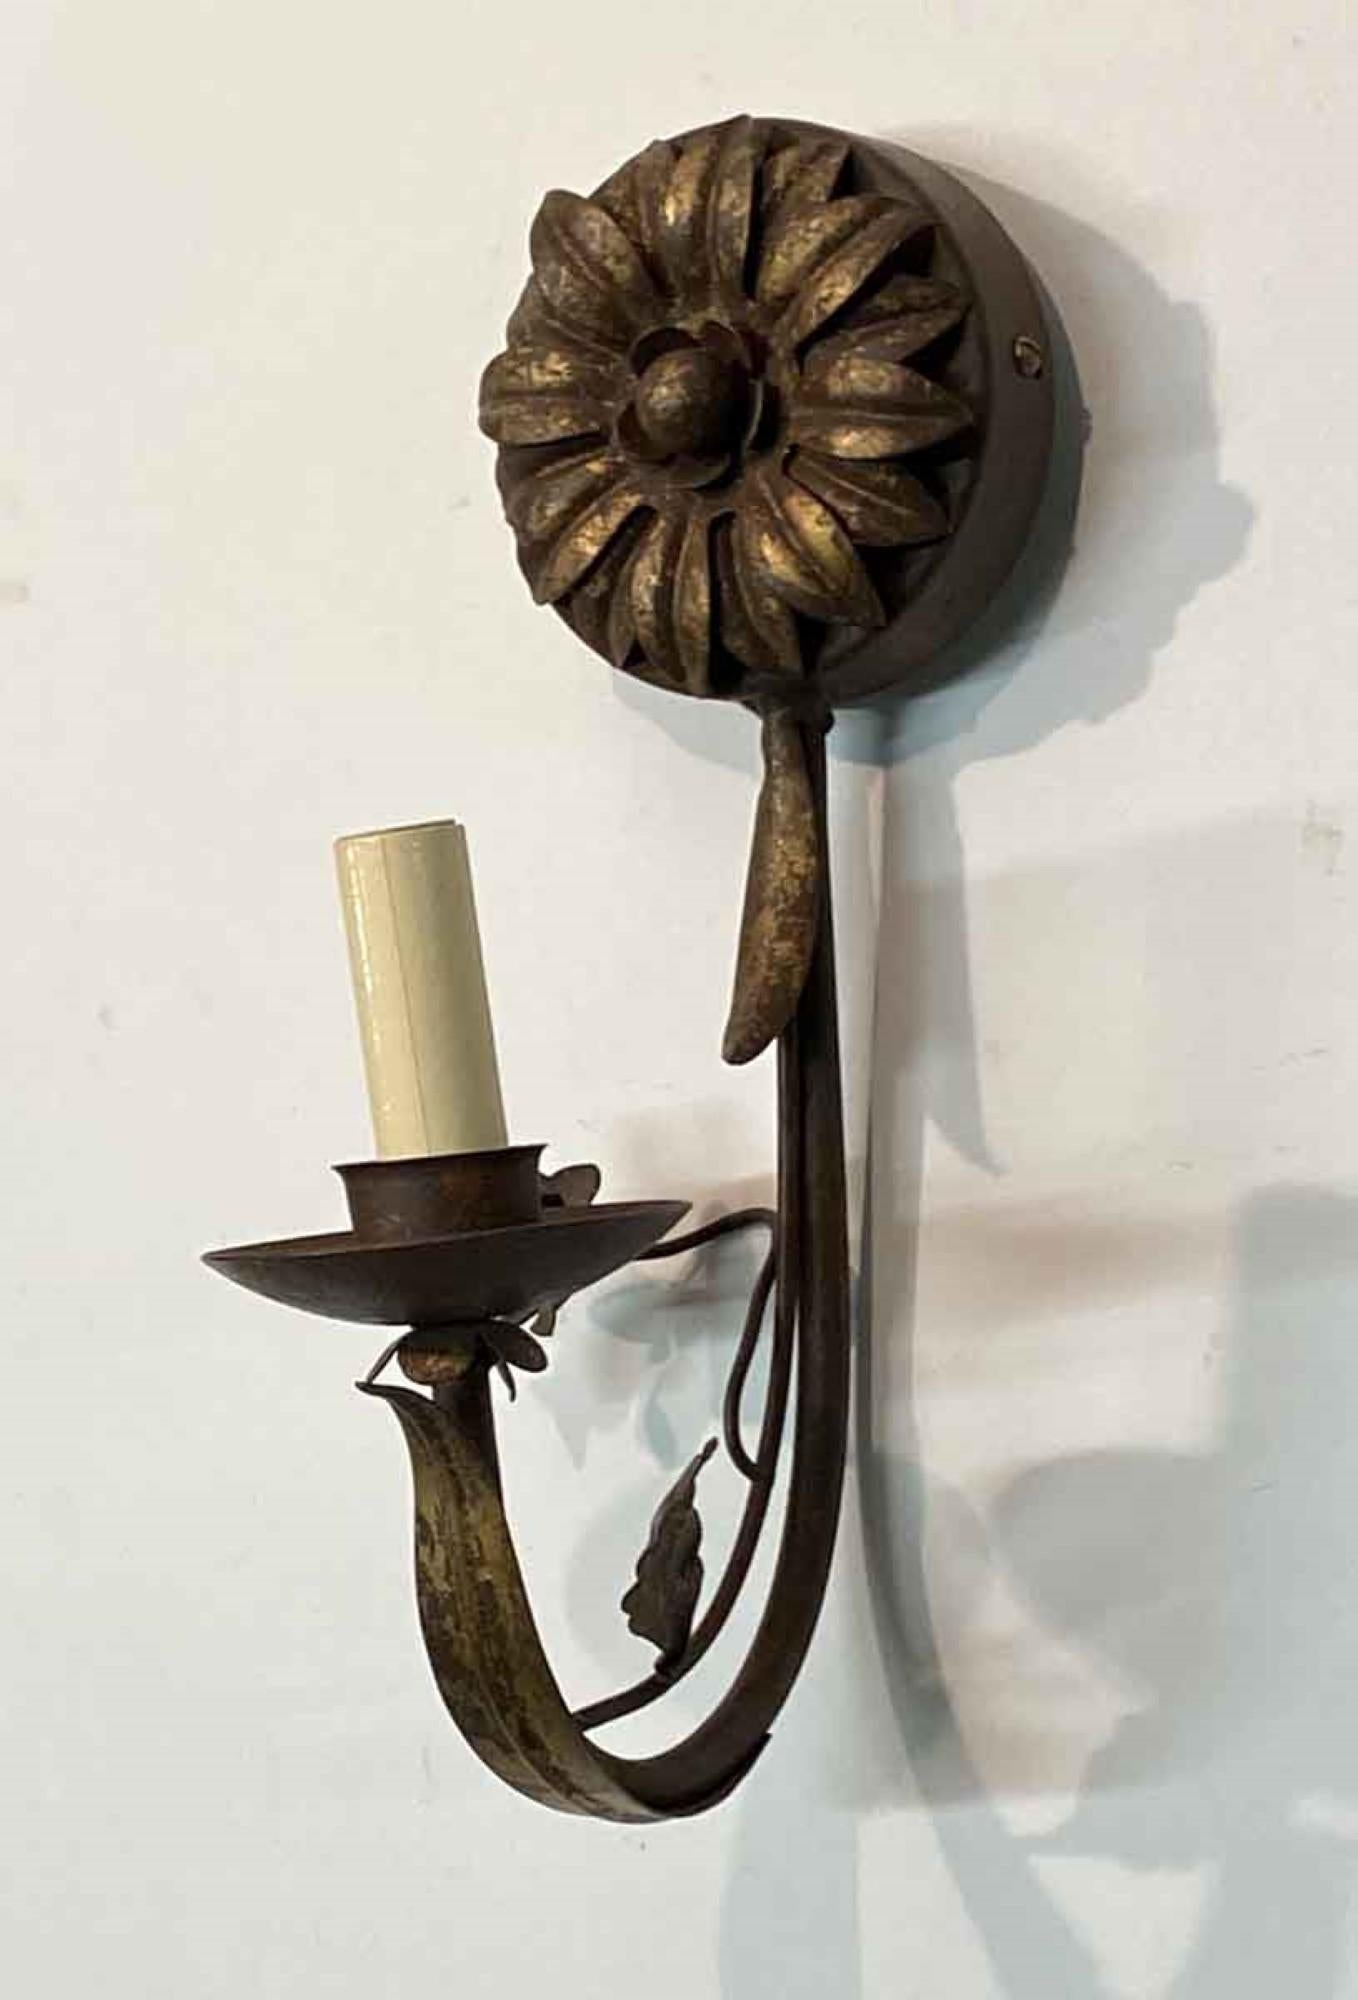 Contemporary 2000s Italian Florentine Wall Sconce in a Gold Gilt Hand Wrought Iron, Qty Avail